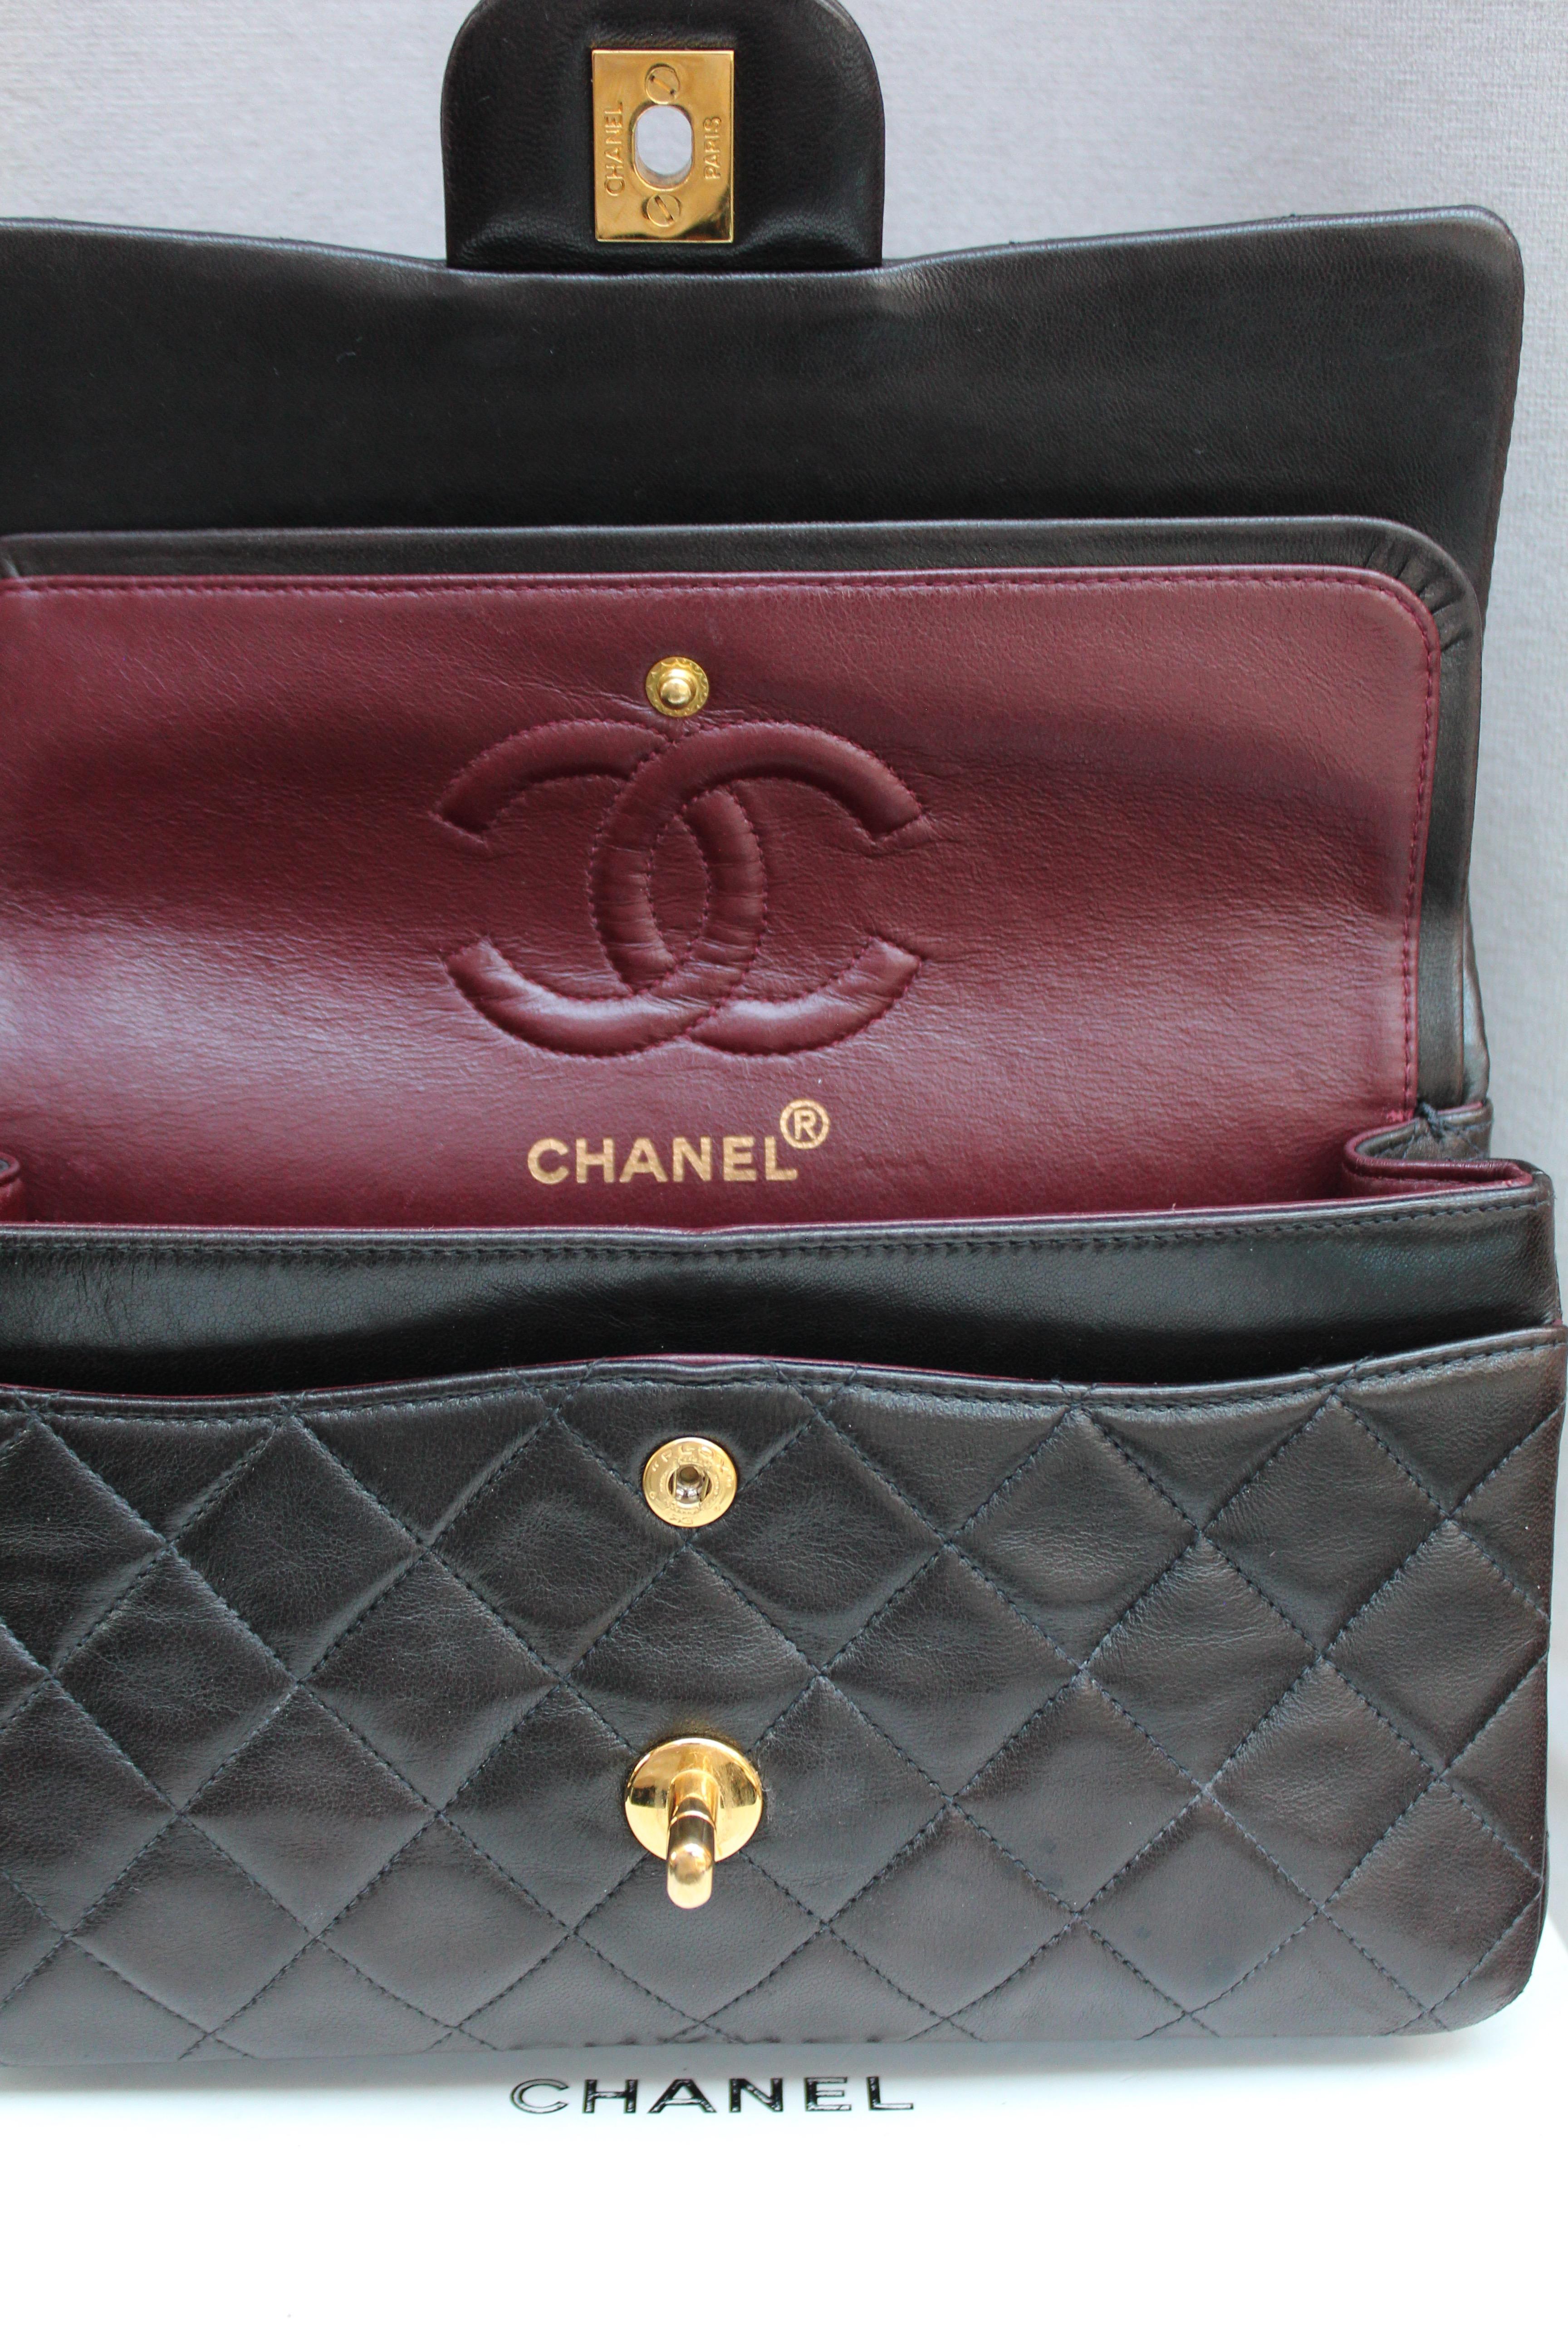 Chanel “Timeless” brown lambskin bag For Sale 5